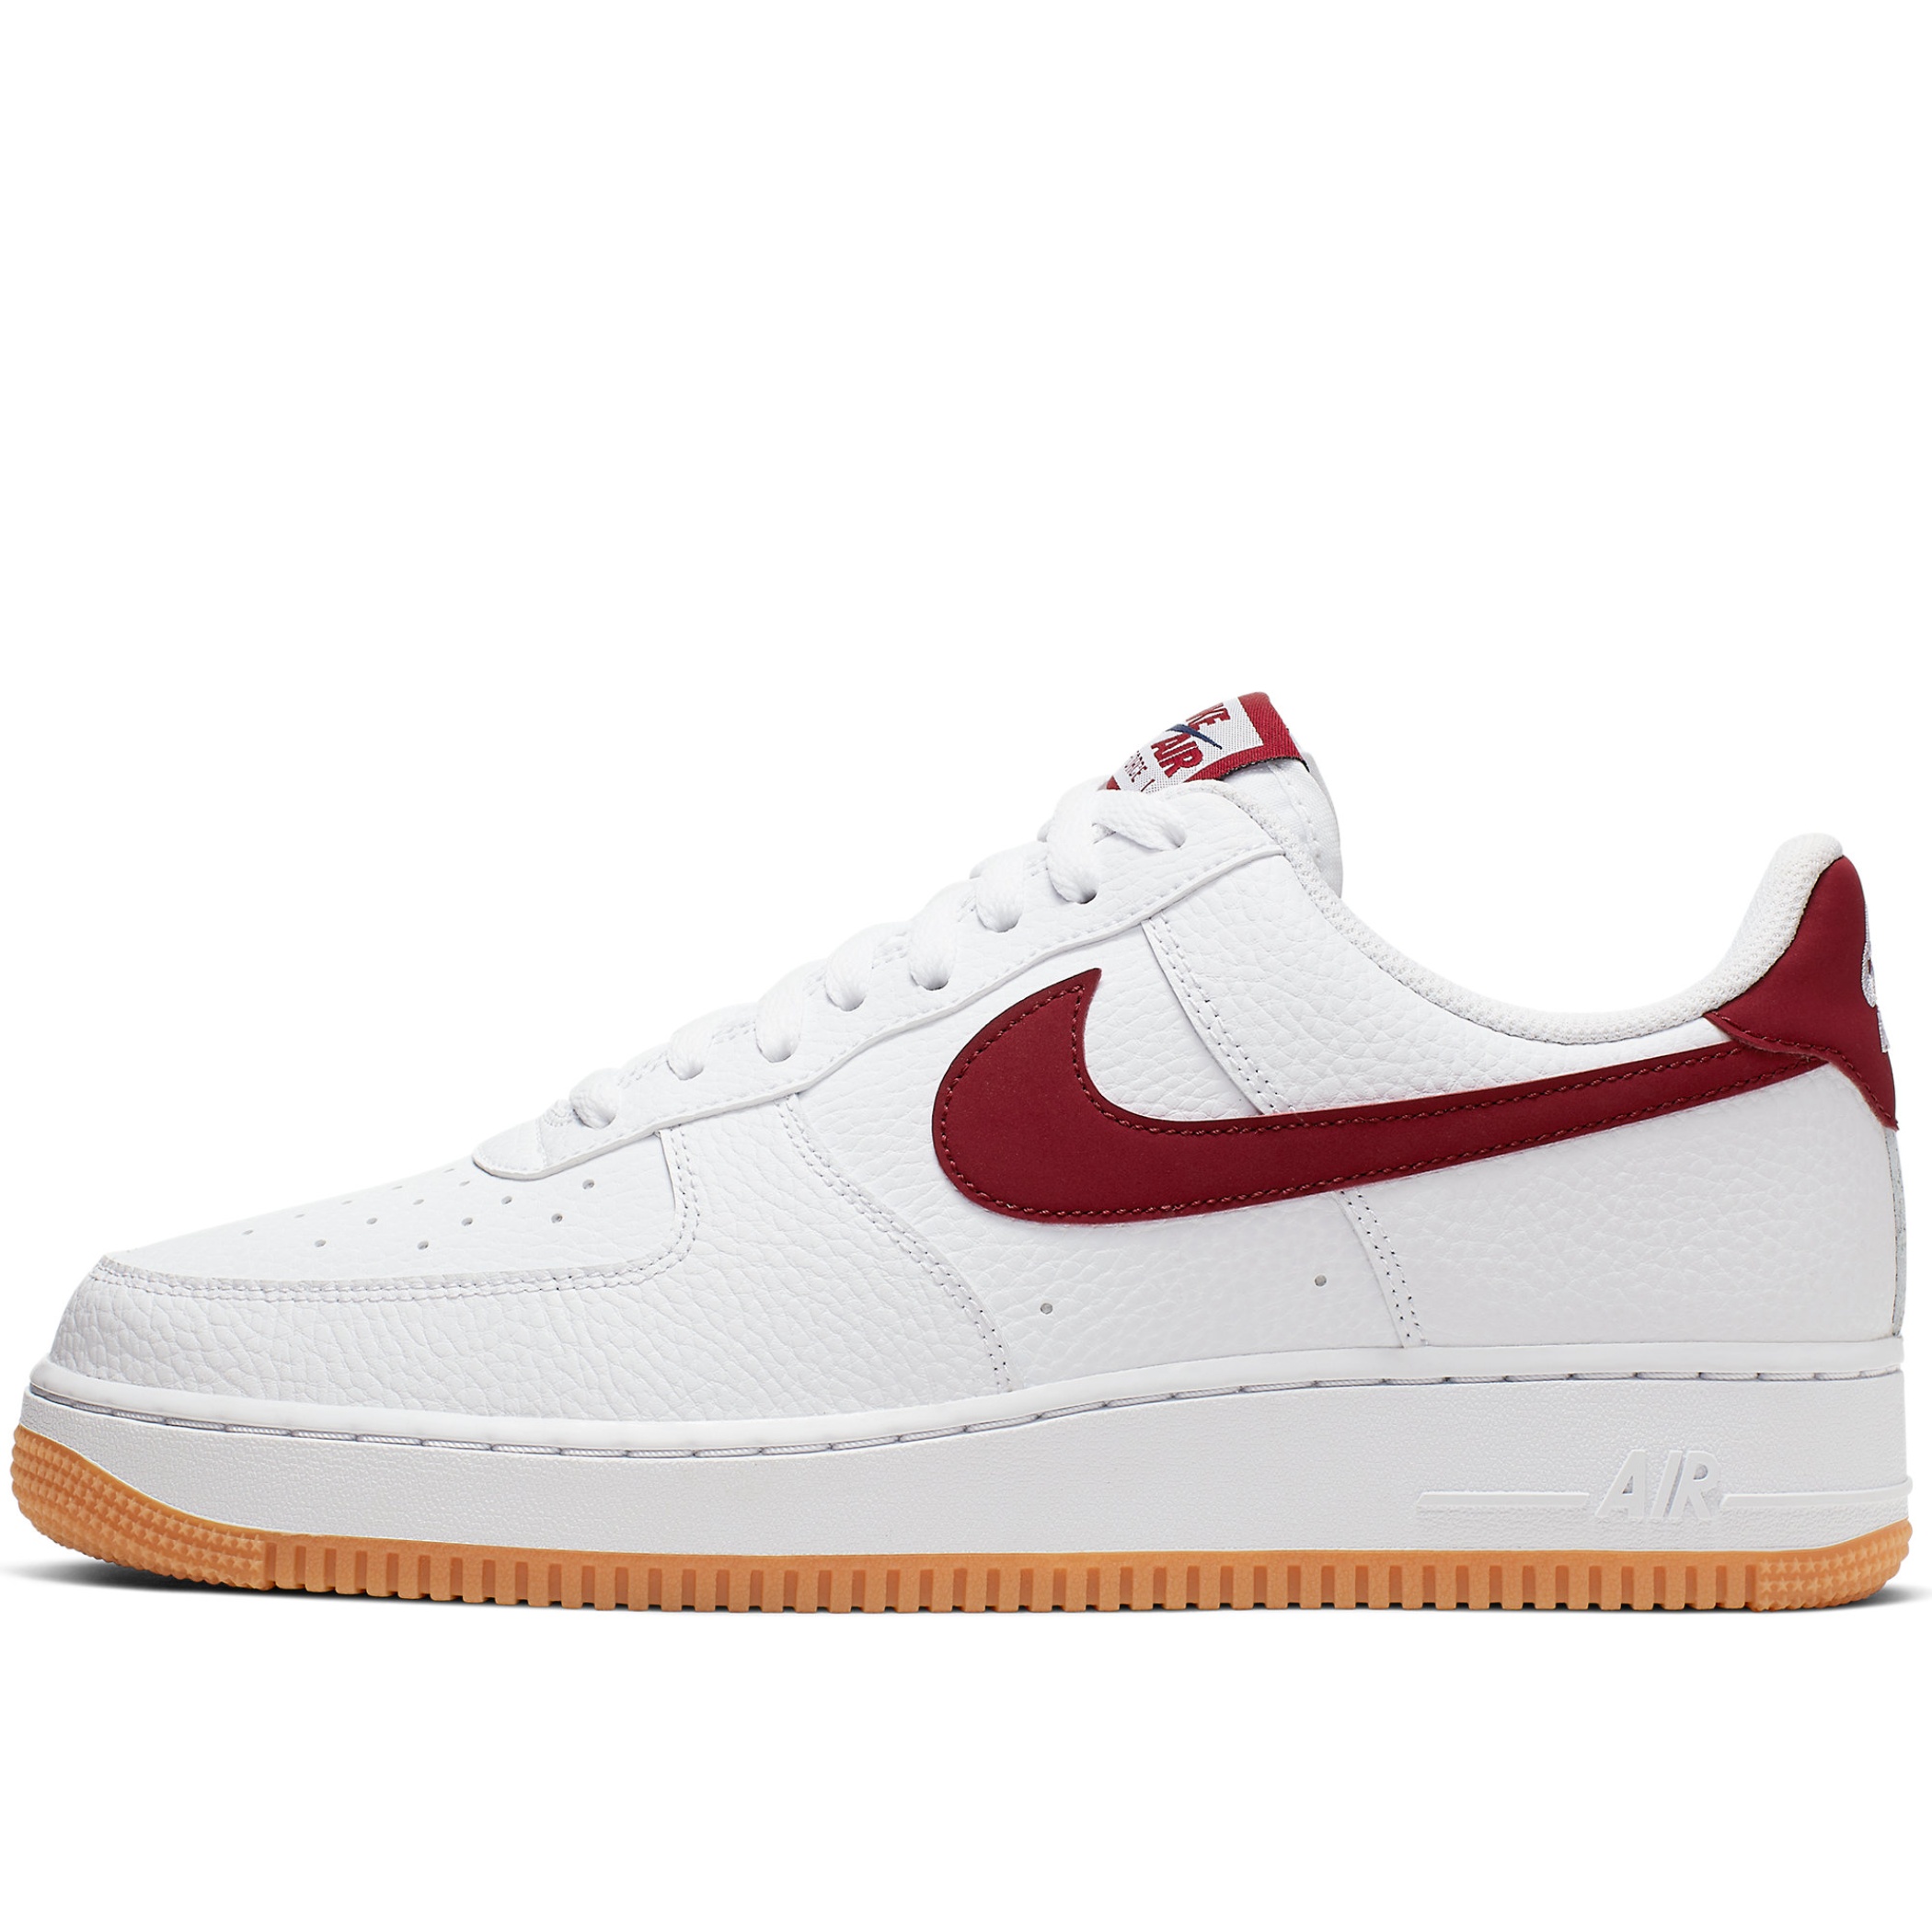 air force 1 red blue and white